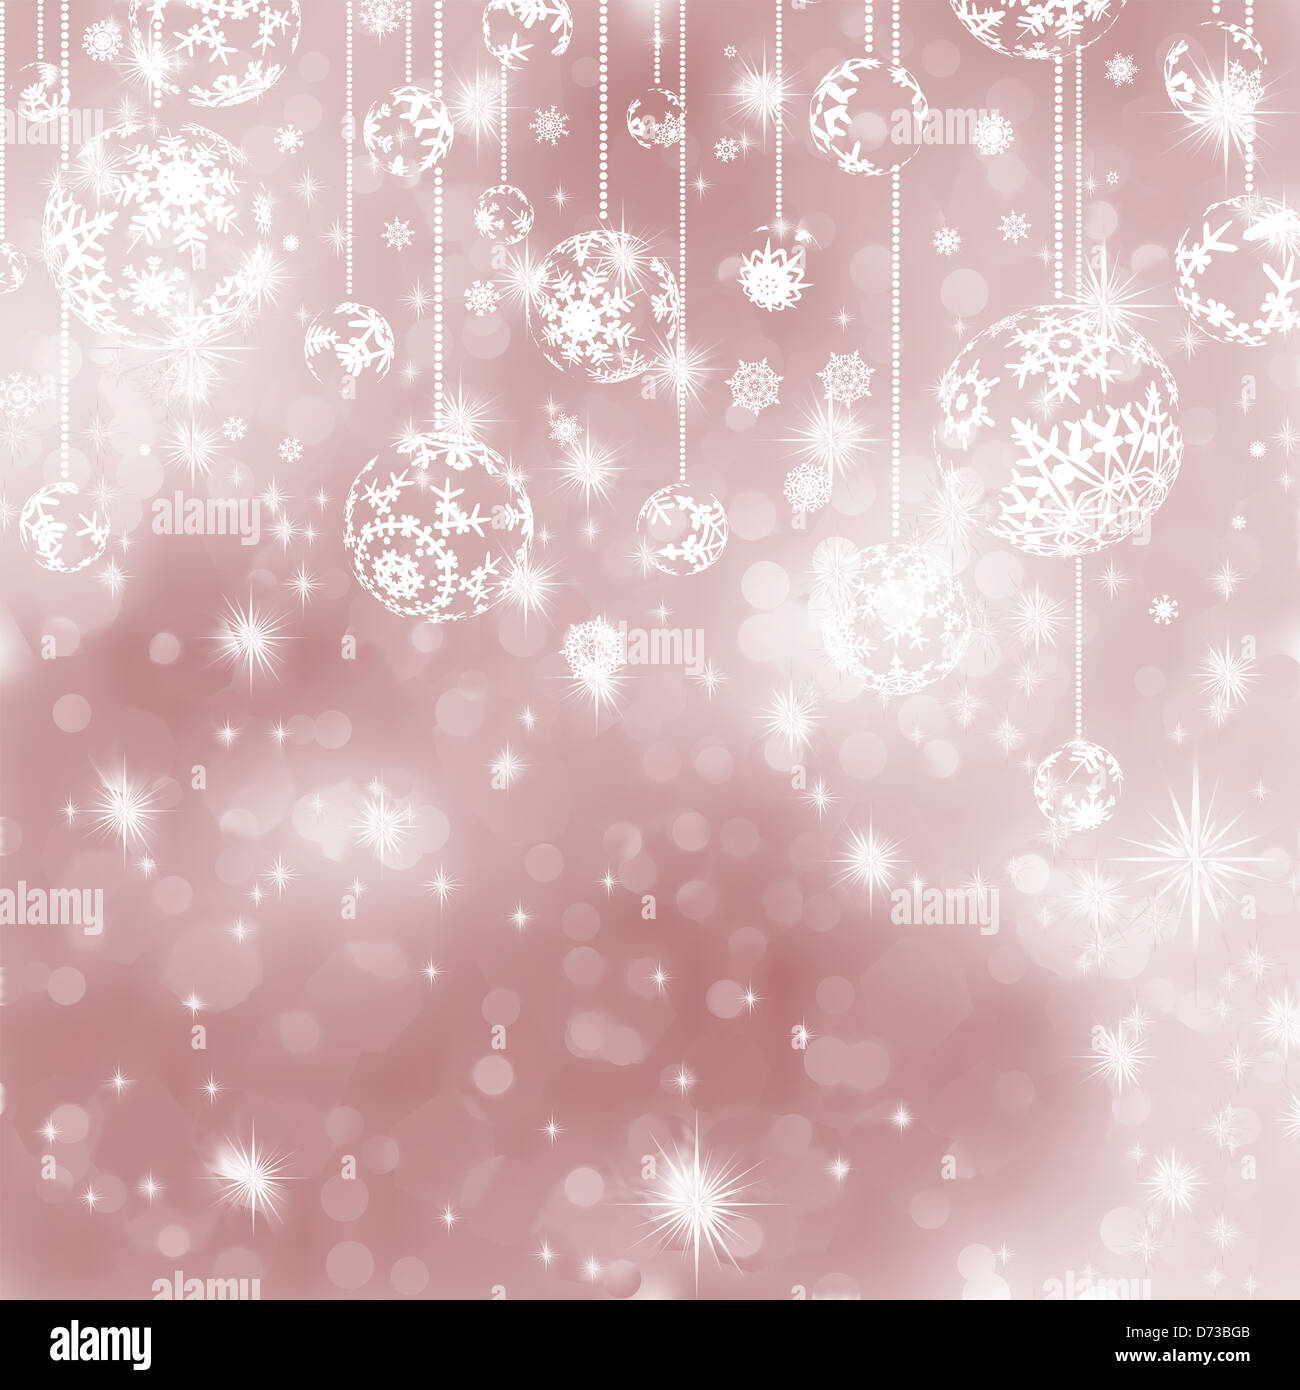 Christmas ball on abstract light background And also includes Stock Photo